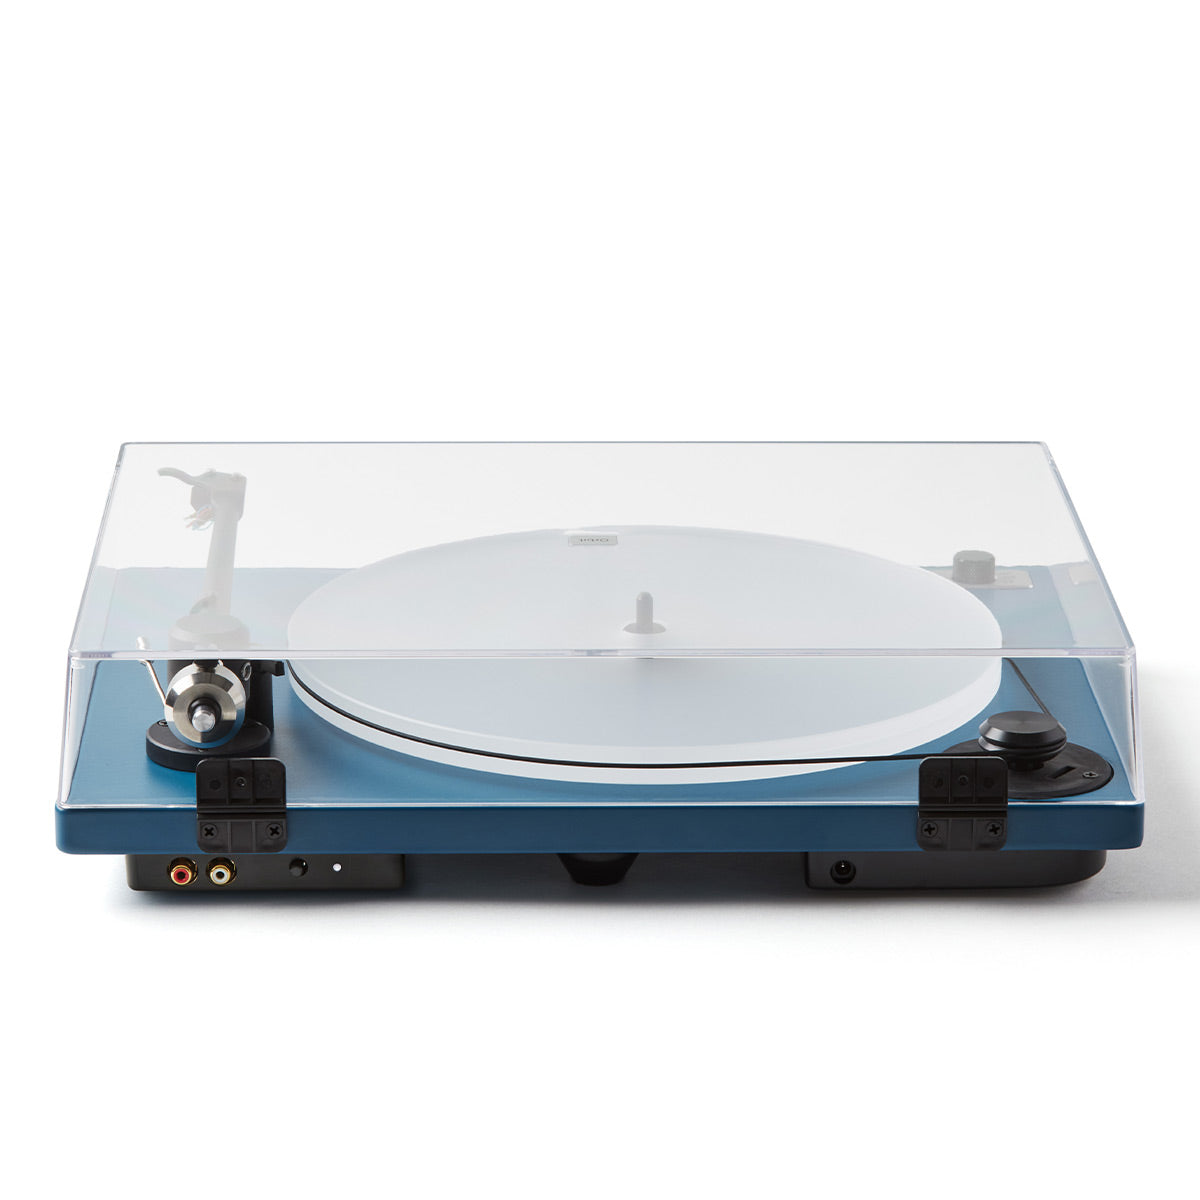 U-Turn Audio Orbit 2 Special Turntable with Built-In Preamp and Ortofon 2M Red Cartridge (Blue)